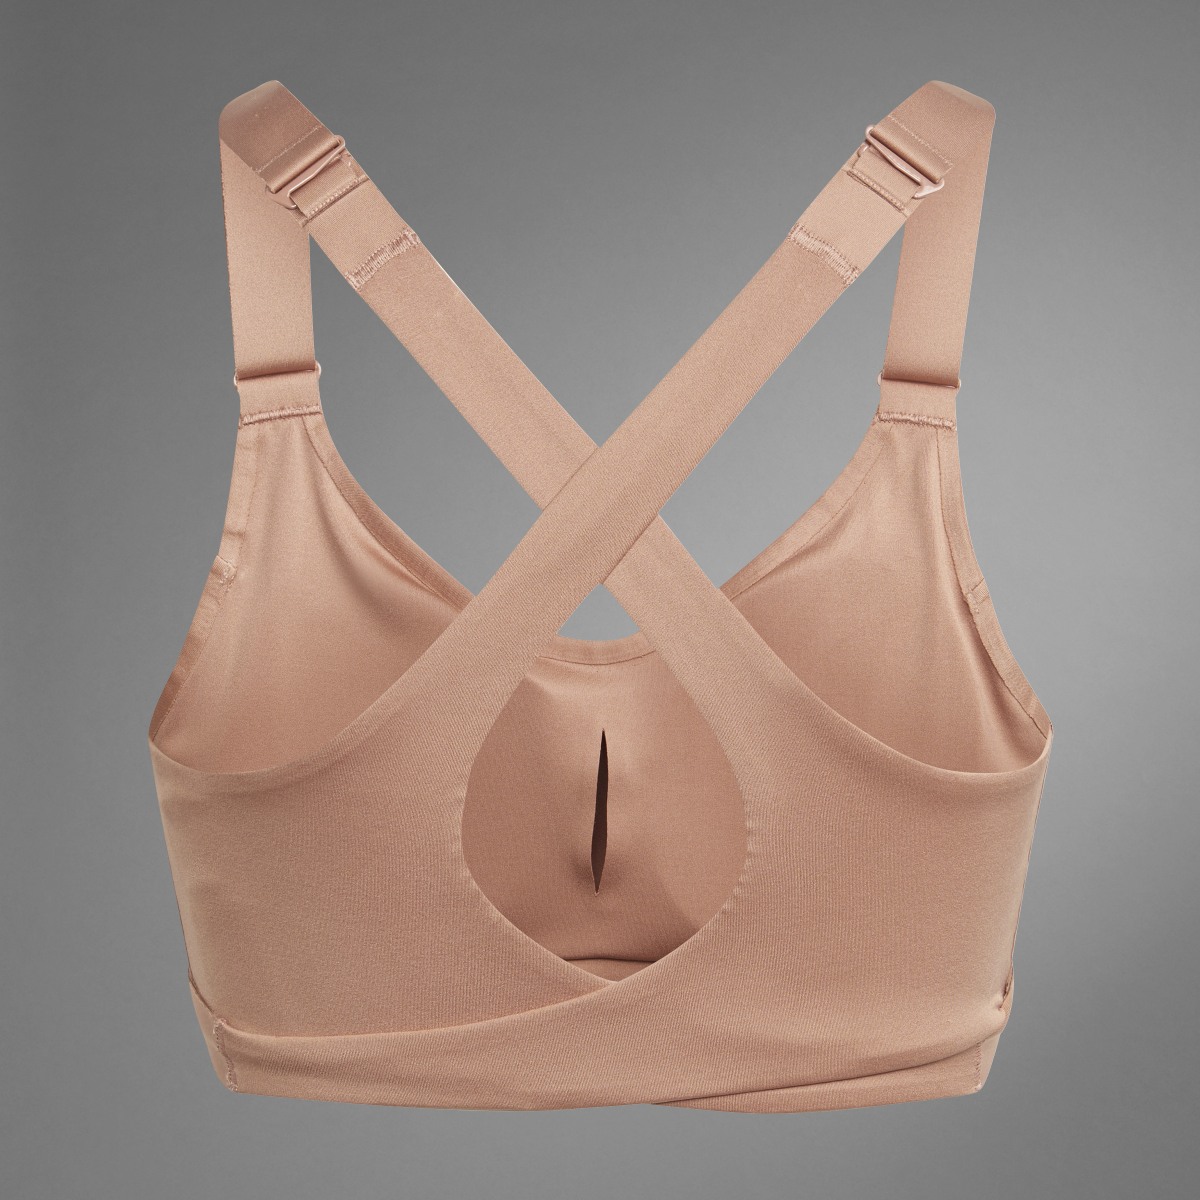 Adidas FastImpact Luxe High Support Bra. 11